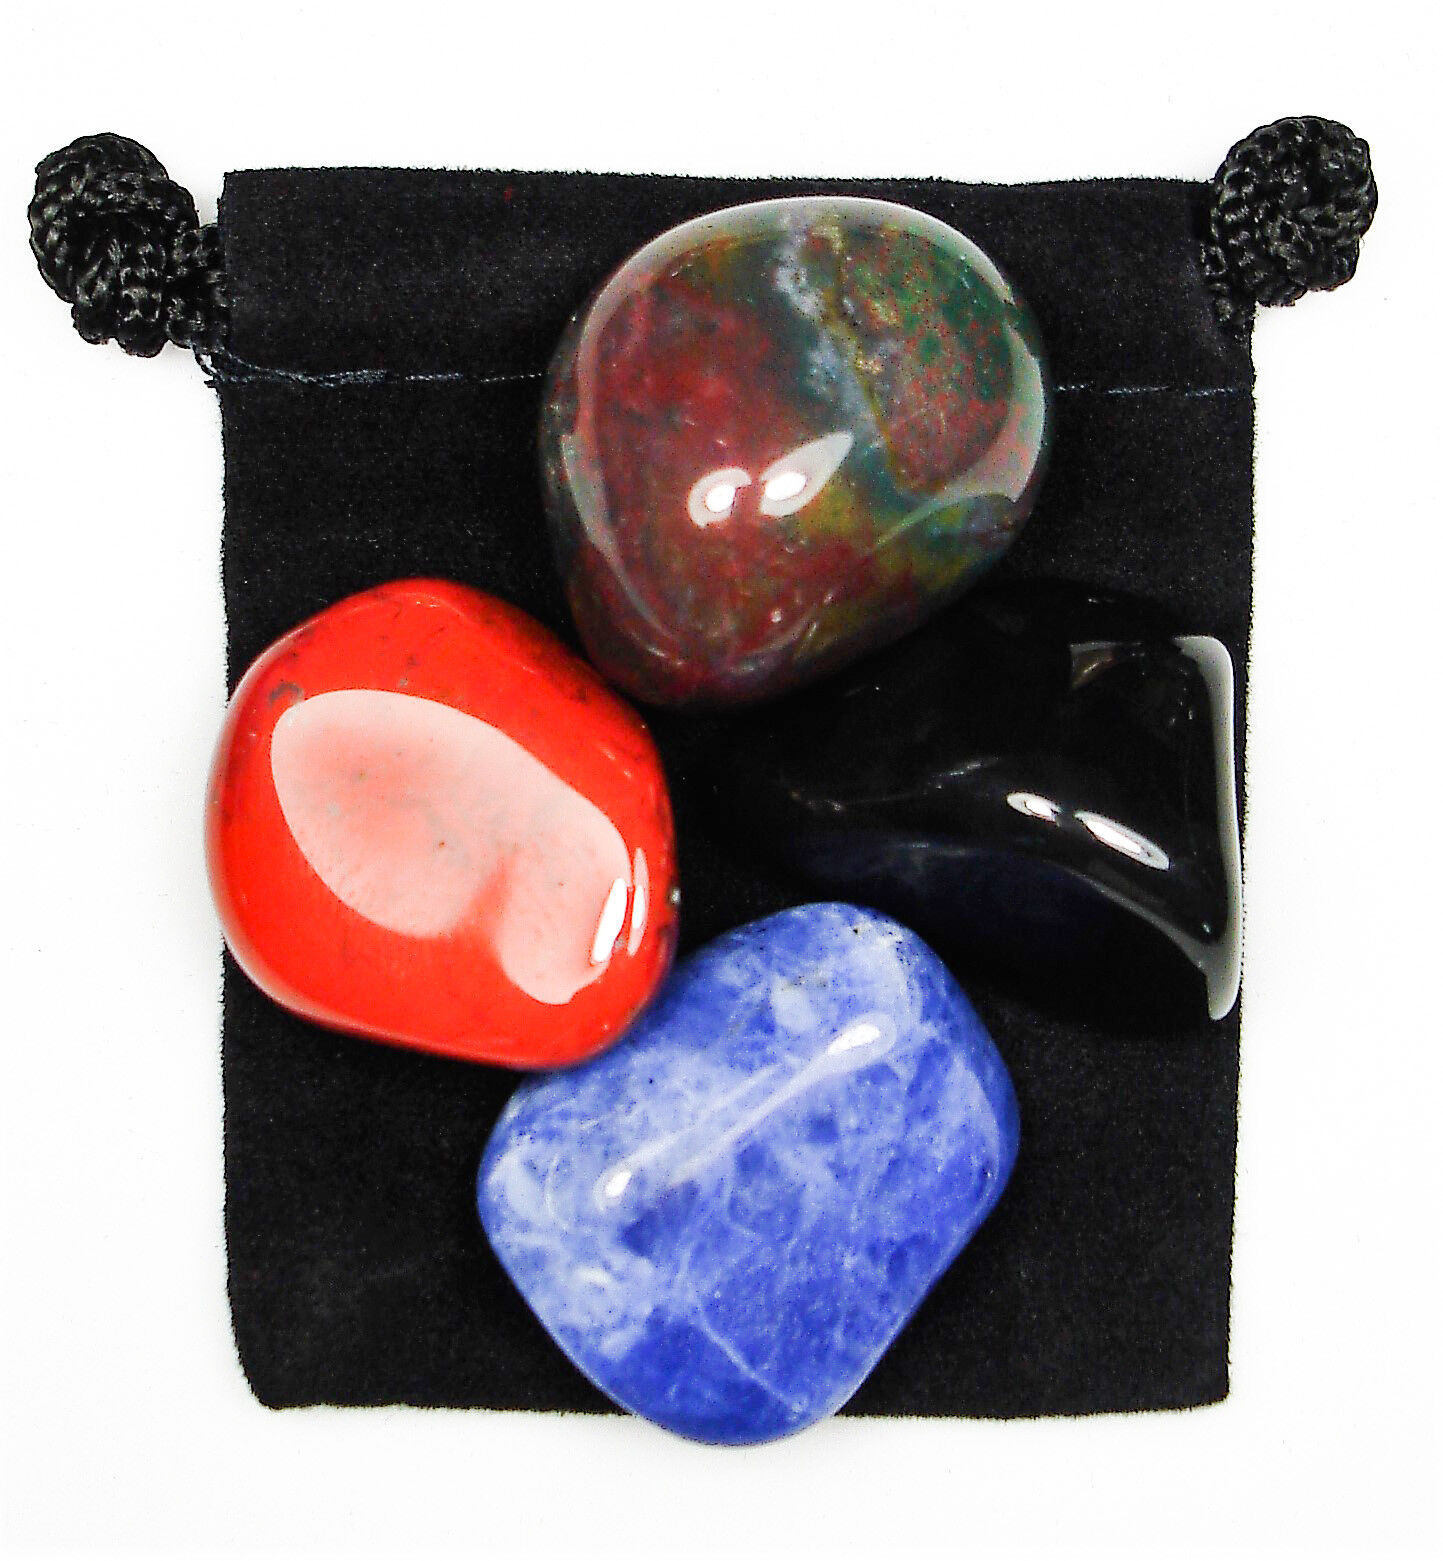 ANXIETY TAMER Tumbled Crystal Healing Set = 4 Stones + Pouch + Description Card